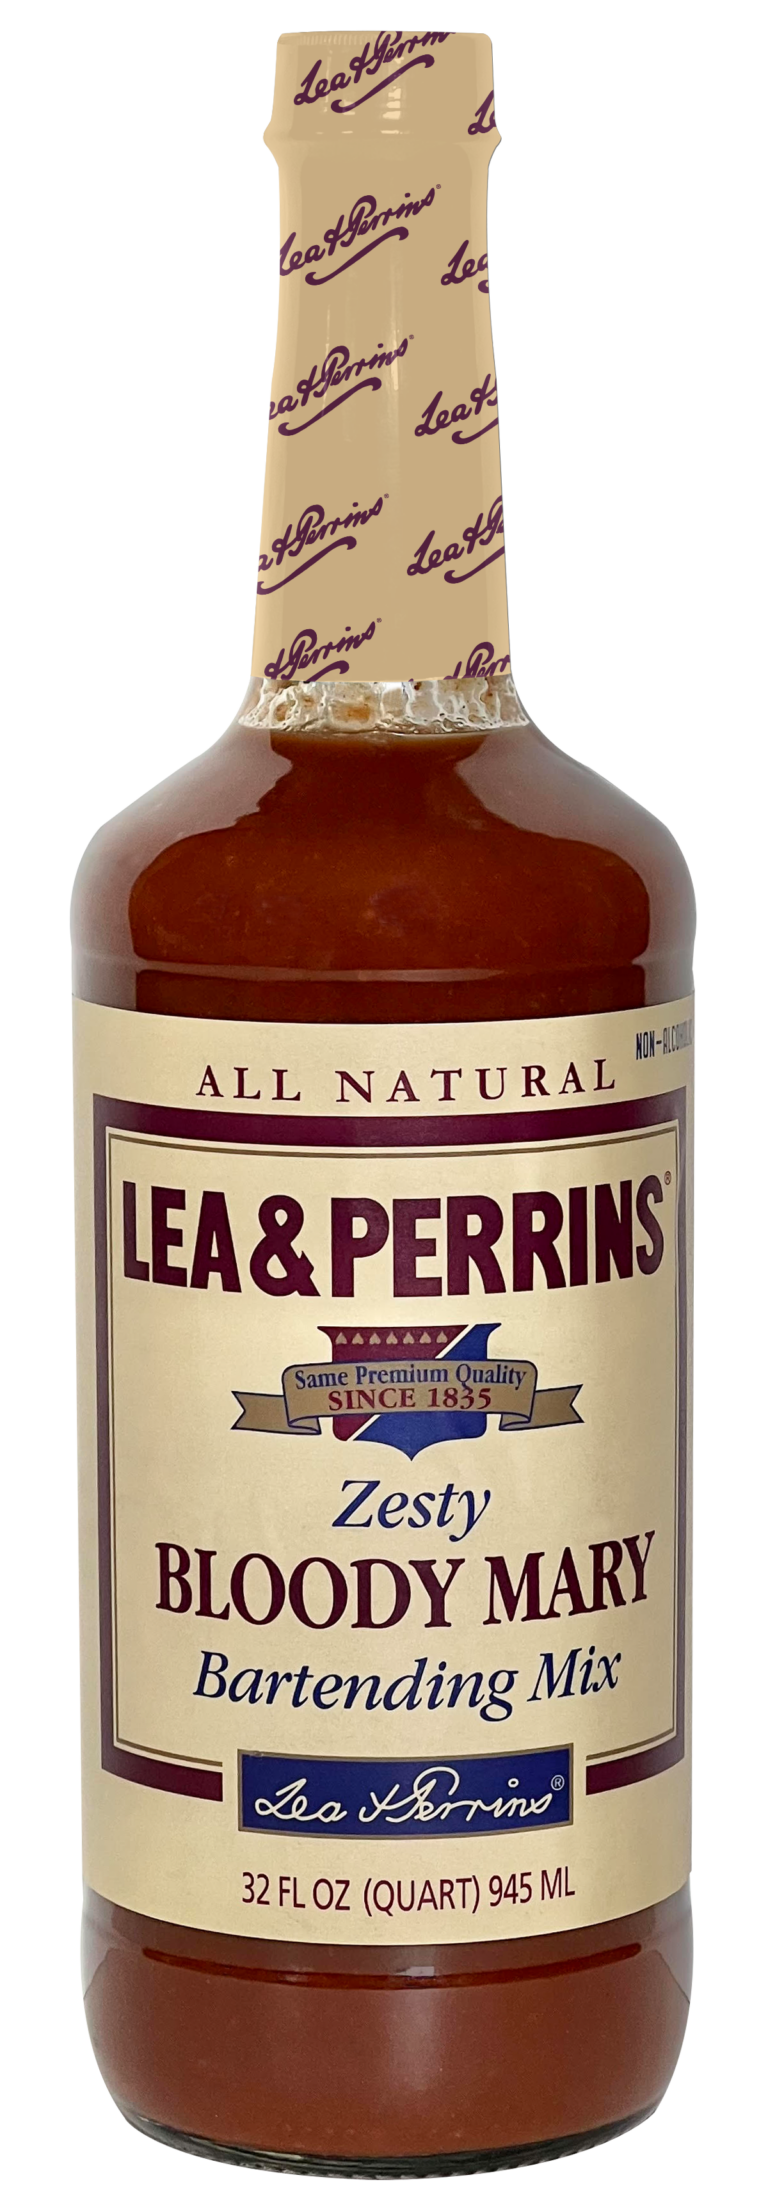 Lea & Perrins Bloody Mary Mix